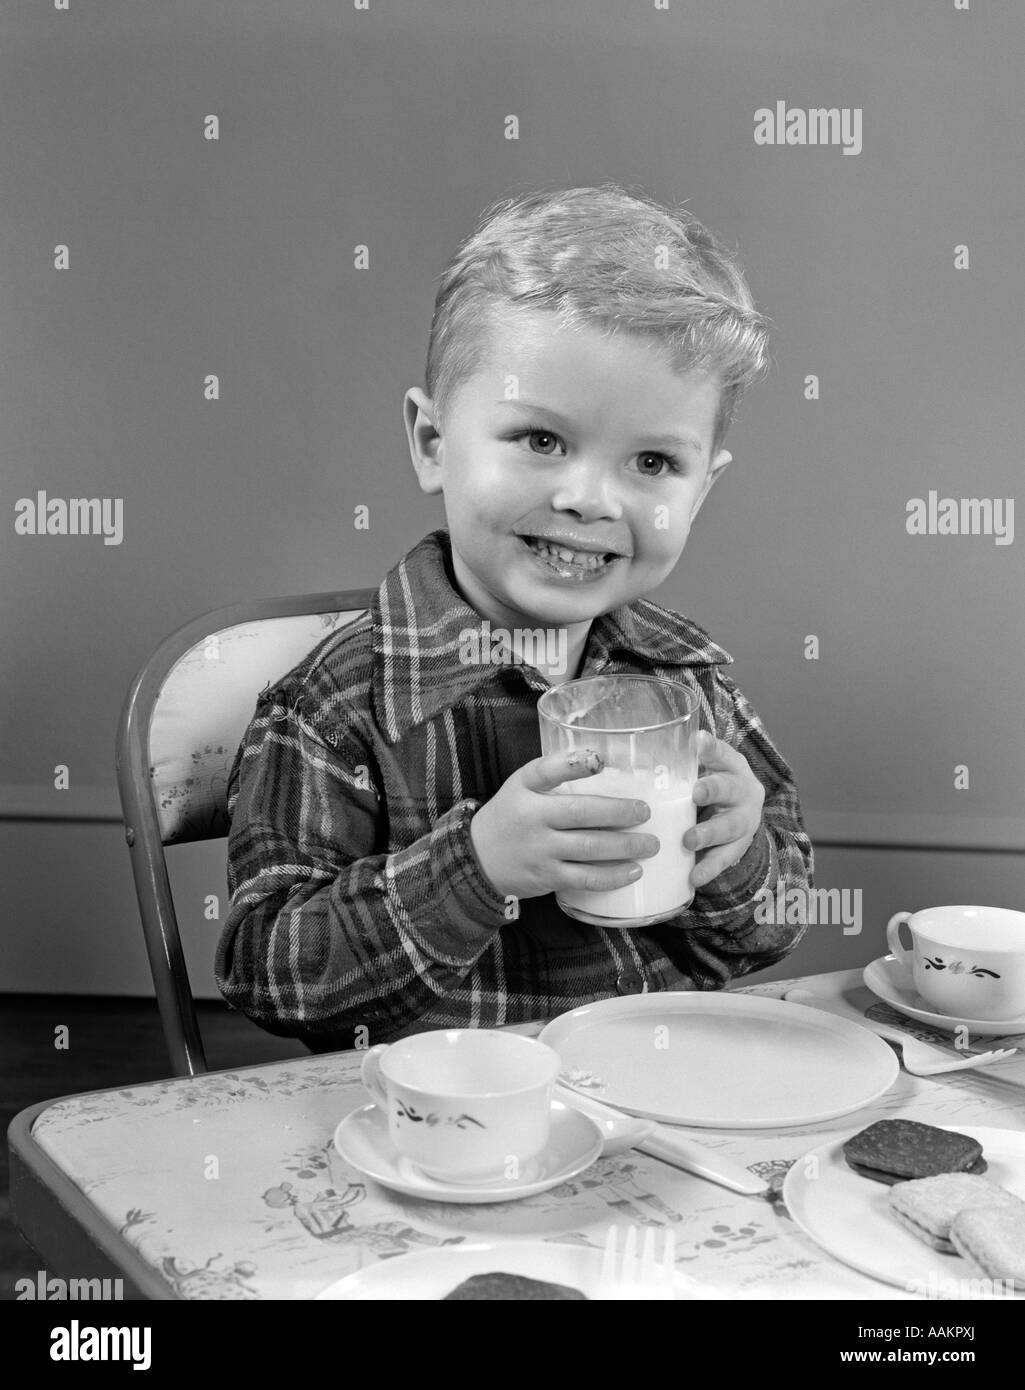 1950s SMILING BOY IN PLAID SHIRT DRINKING MILK AT TABLE LOOKING AT CAMERA Stock Photo